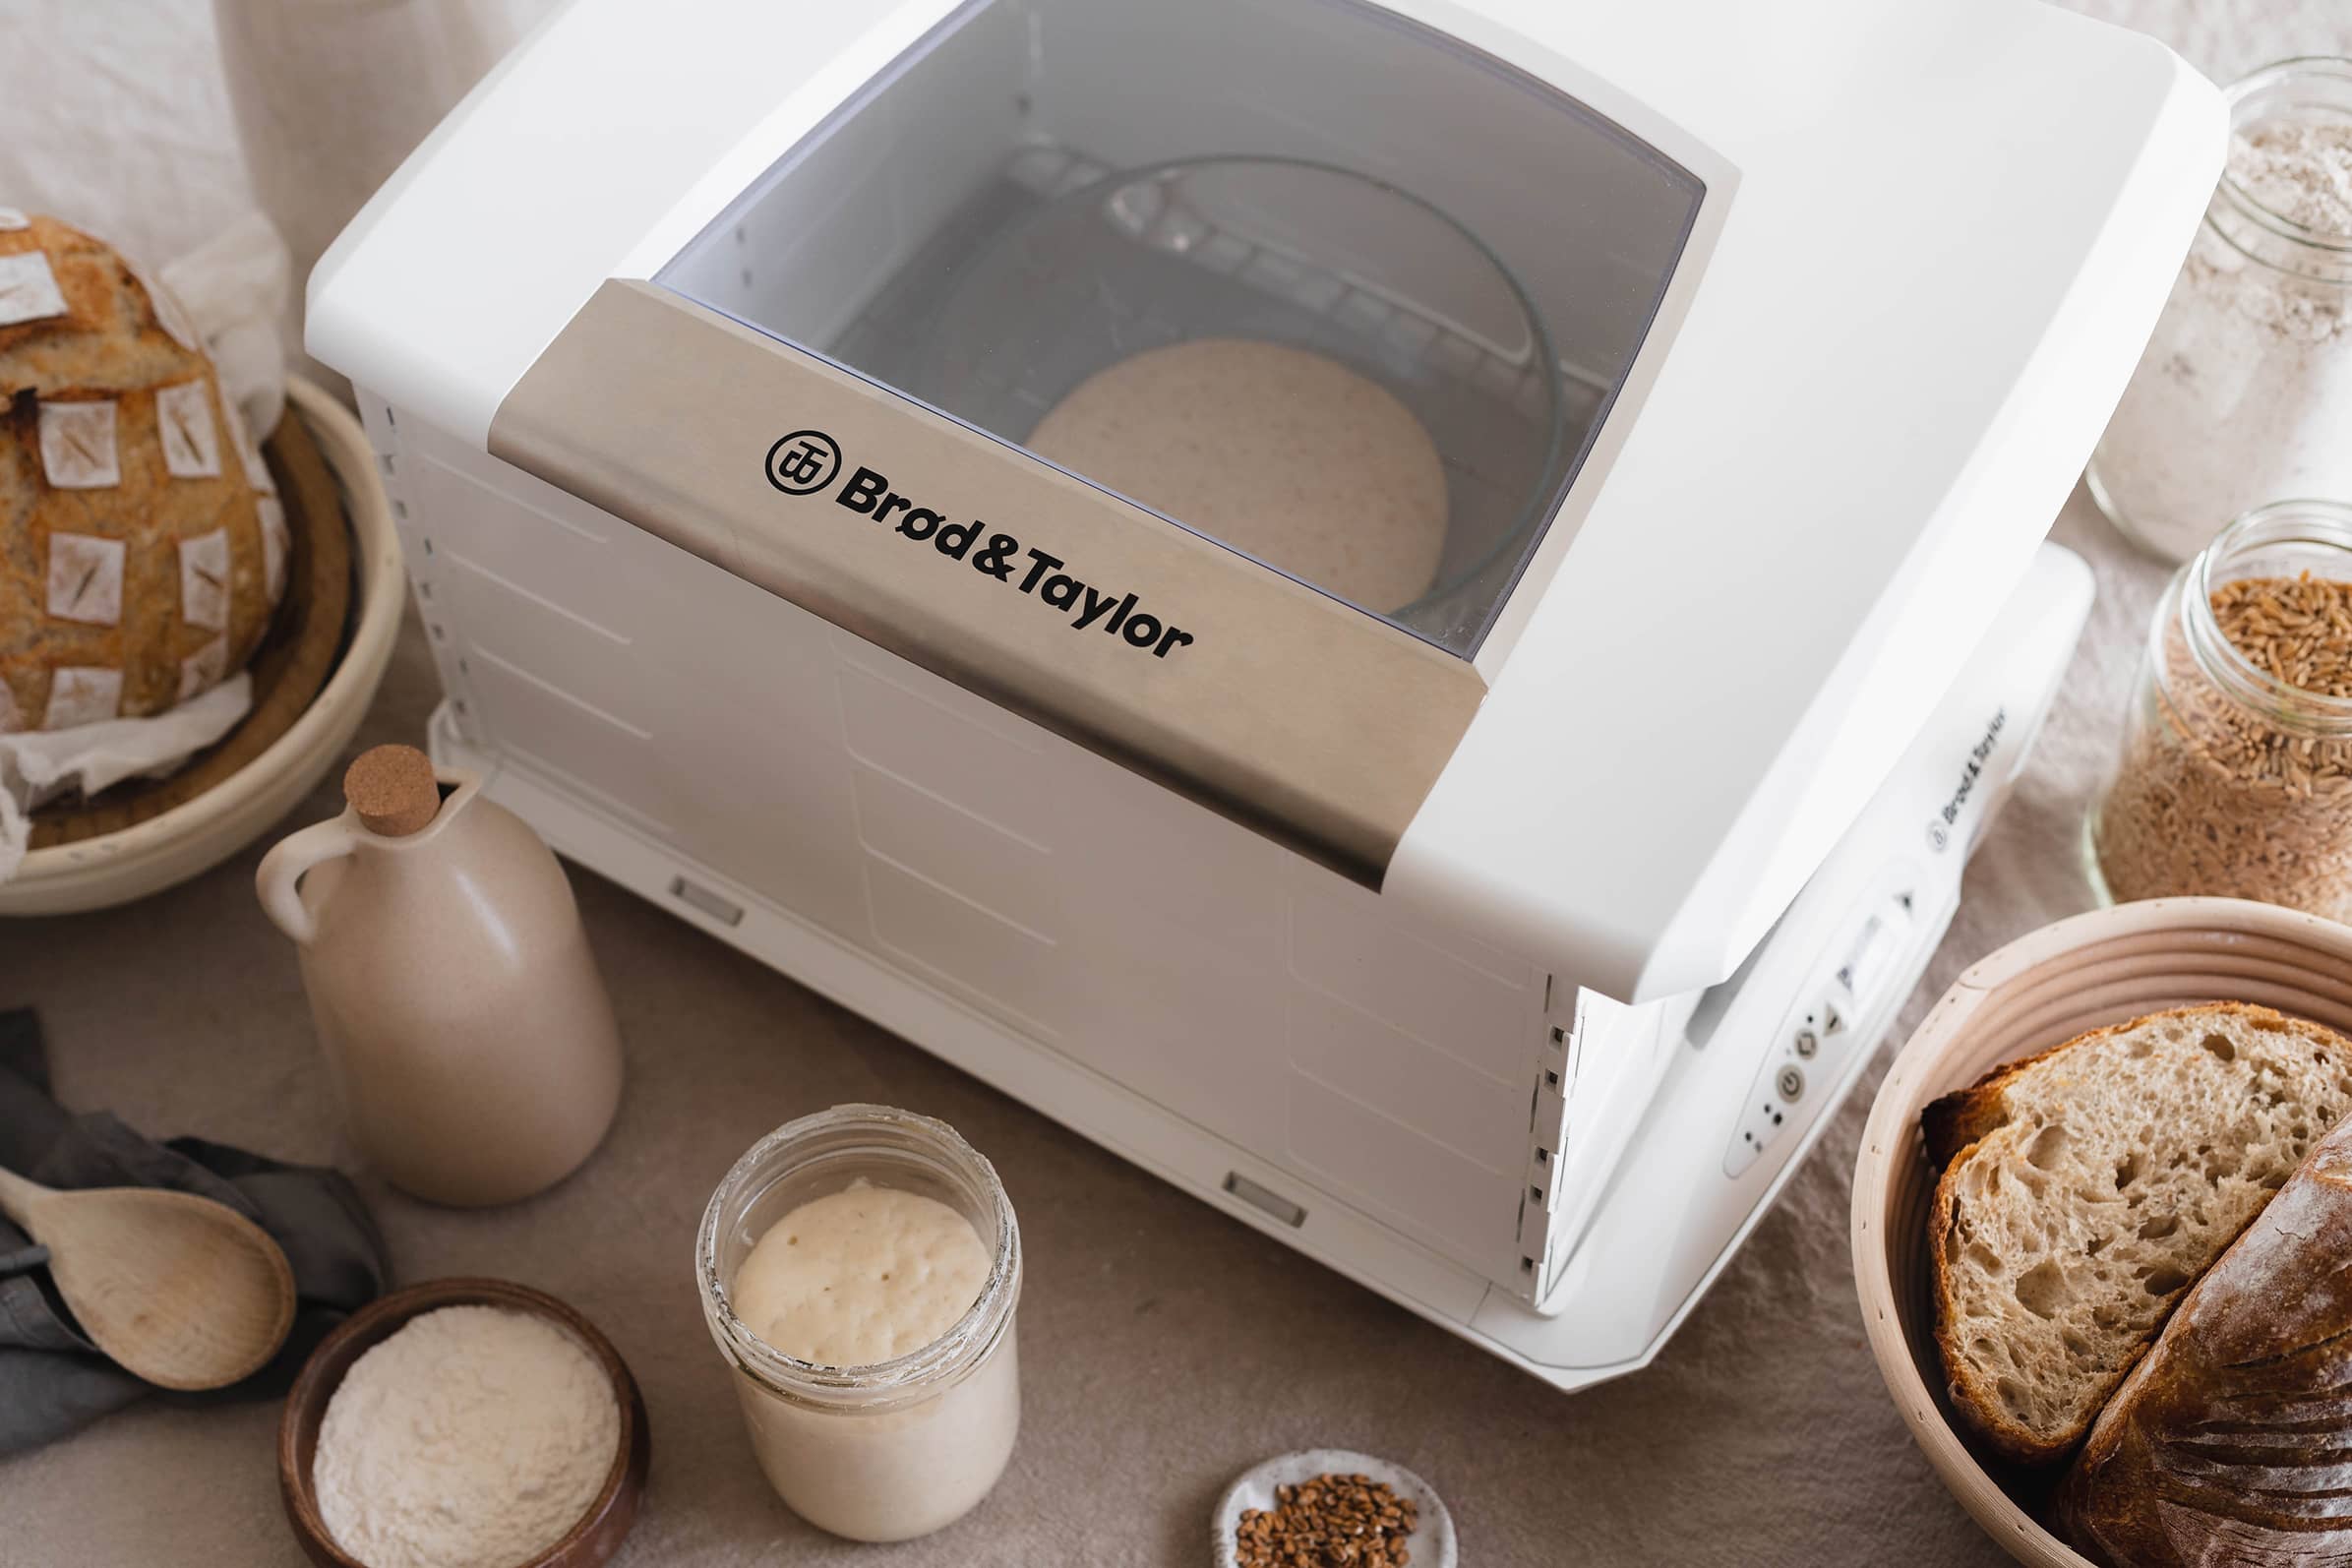 Bread Proofer, Brod and Taylor, Folding Dough Proofing Box Warmer